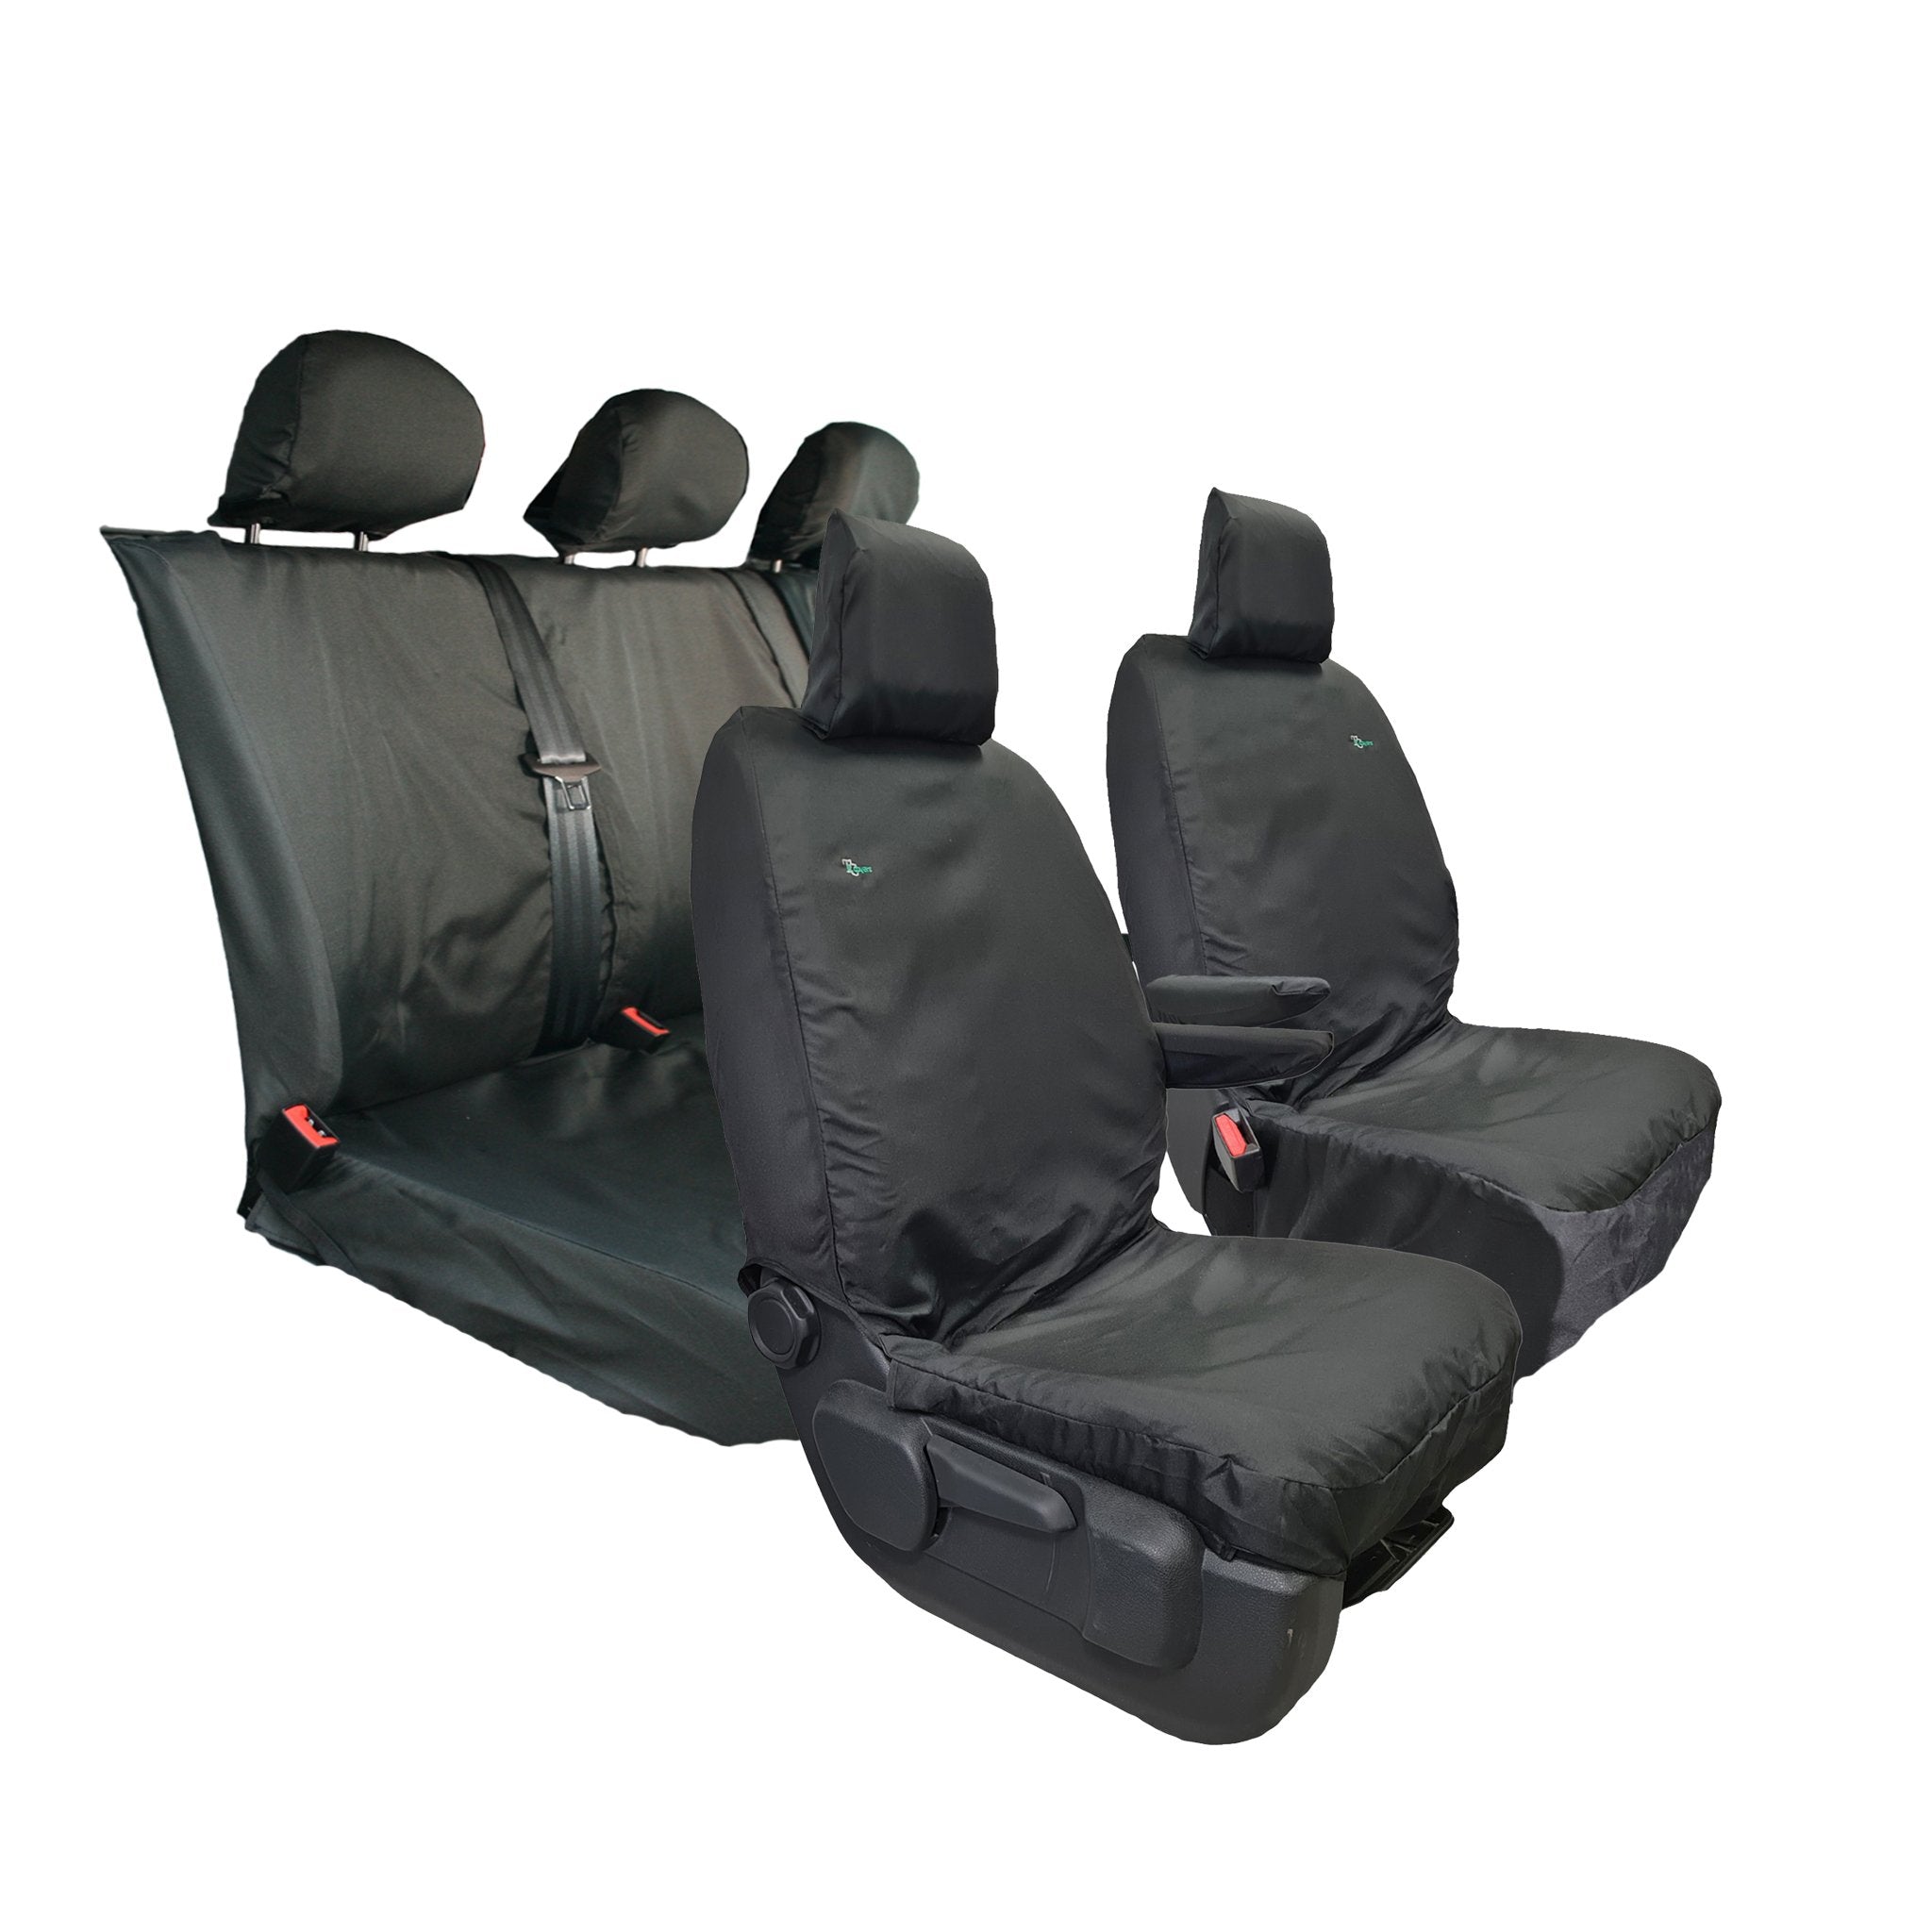 Toyota Proace Seat Covers (2016 onwards)